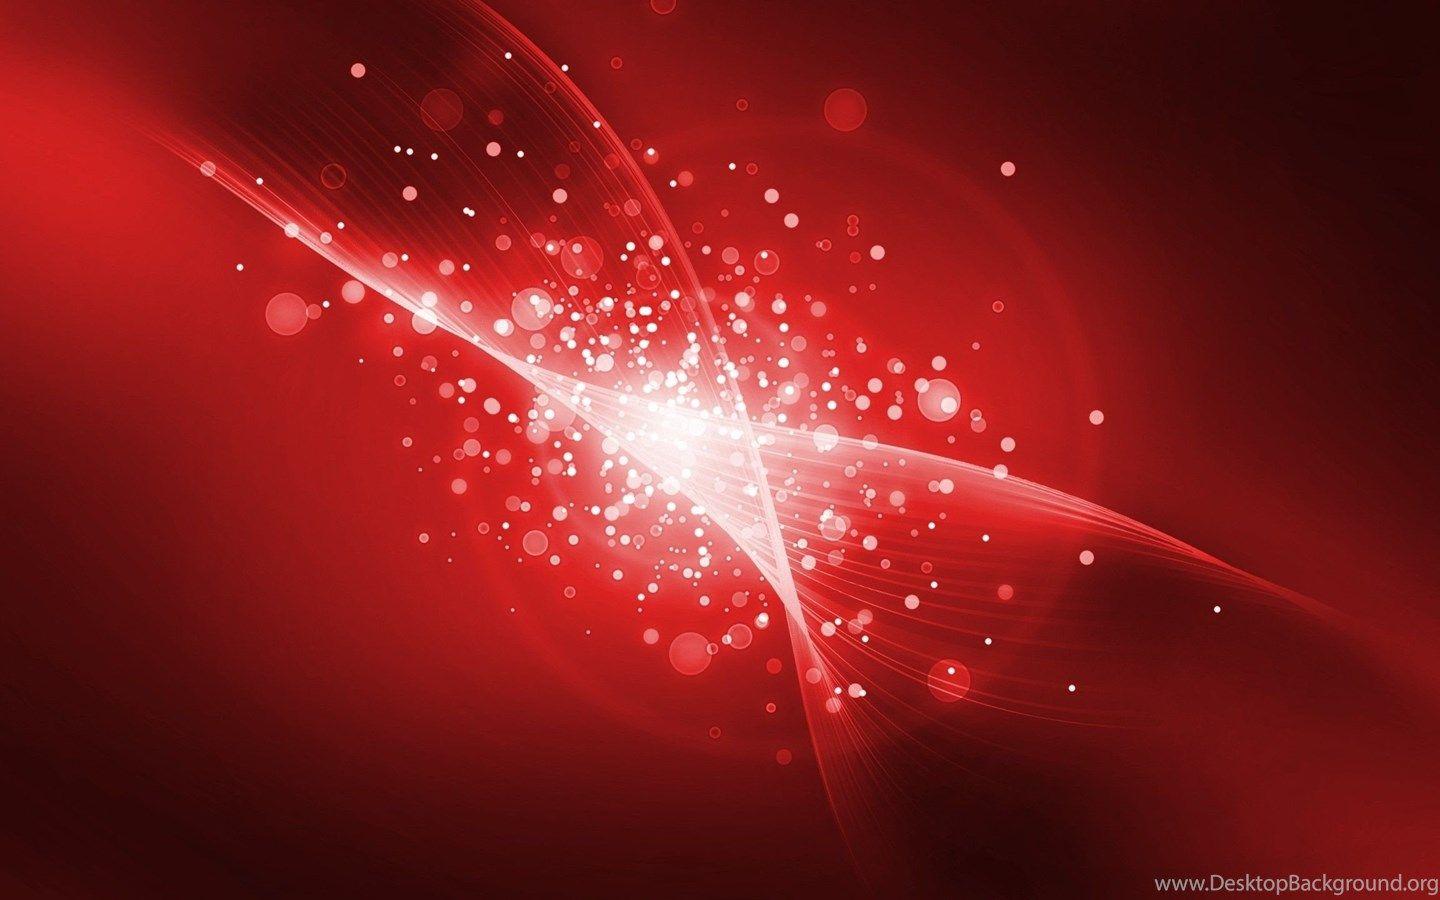 Red Abstract Windows 1.0 Logo - Red Abstract Windows 8.1 Wallpaper And Theme Desktop Background